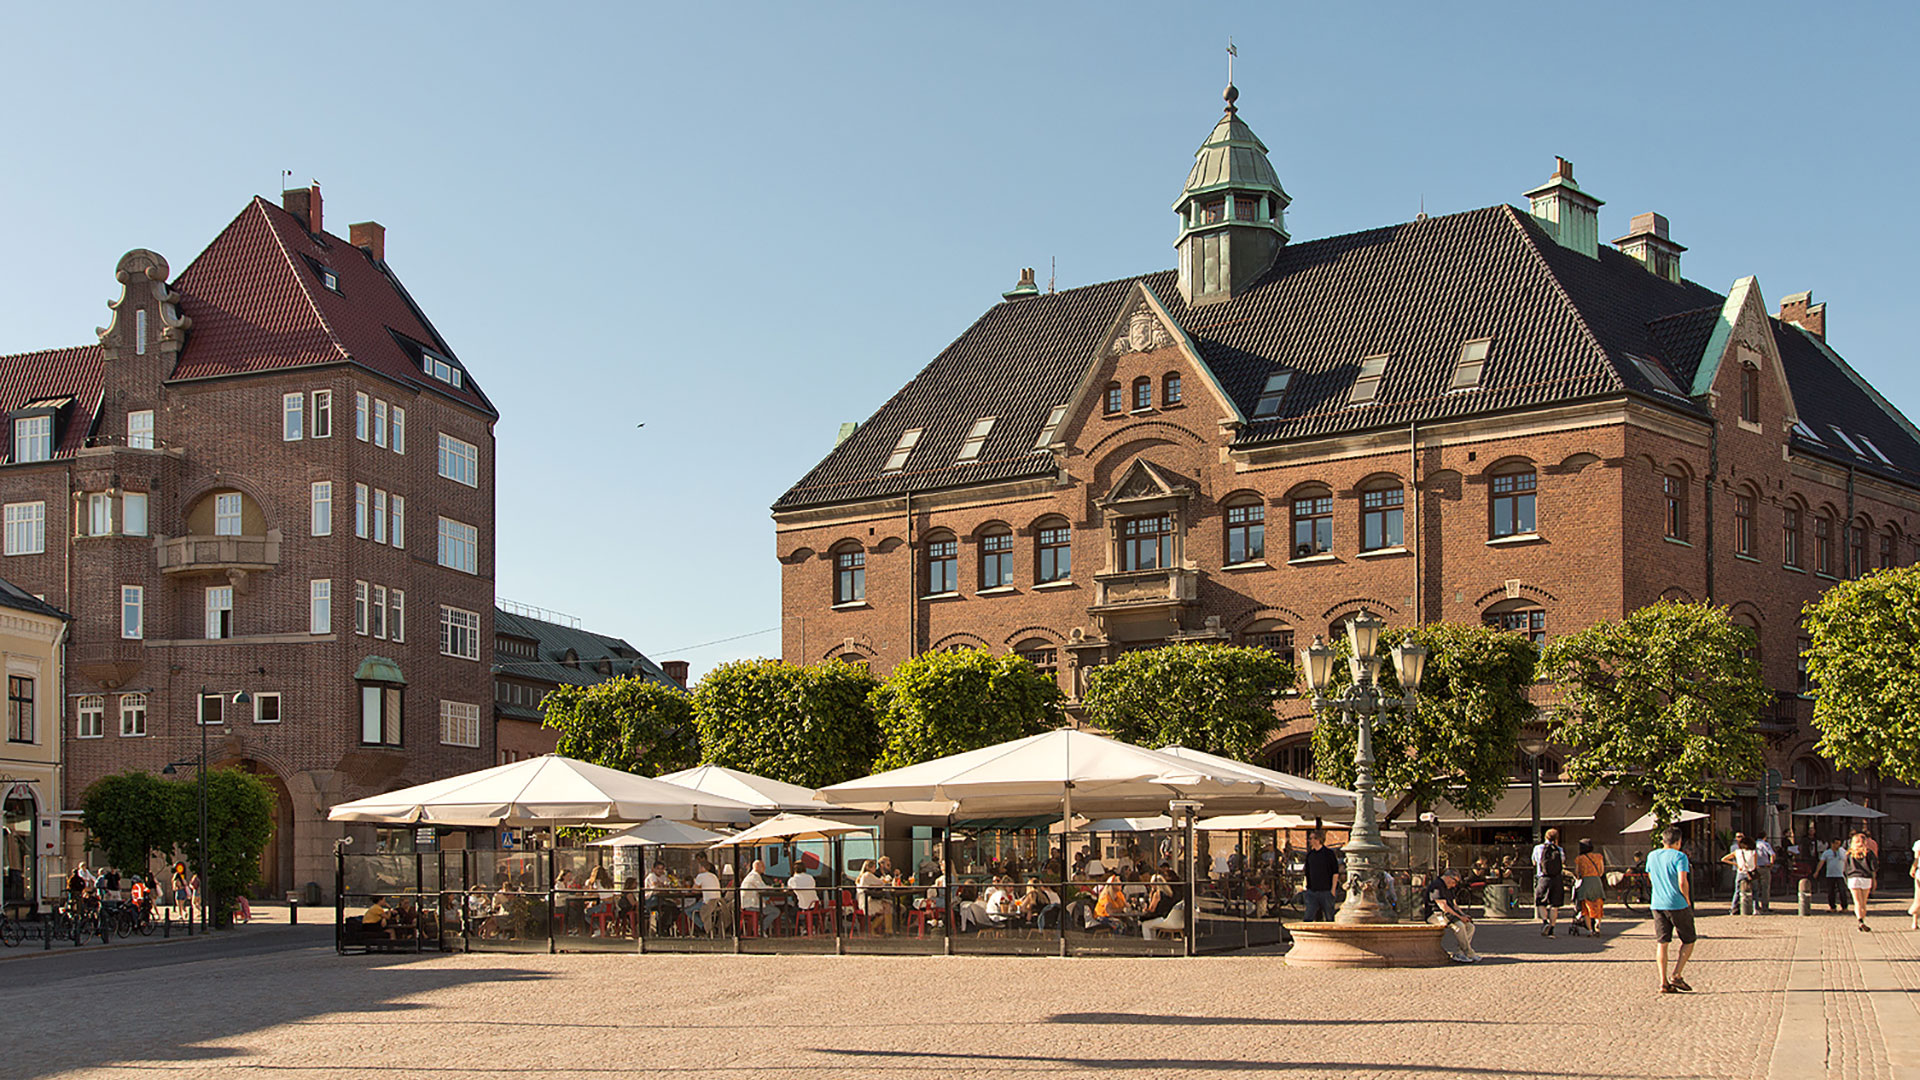 A pleasant bike ride away or a 10 minute bus ride downtown to Lund city center.